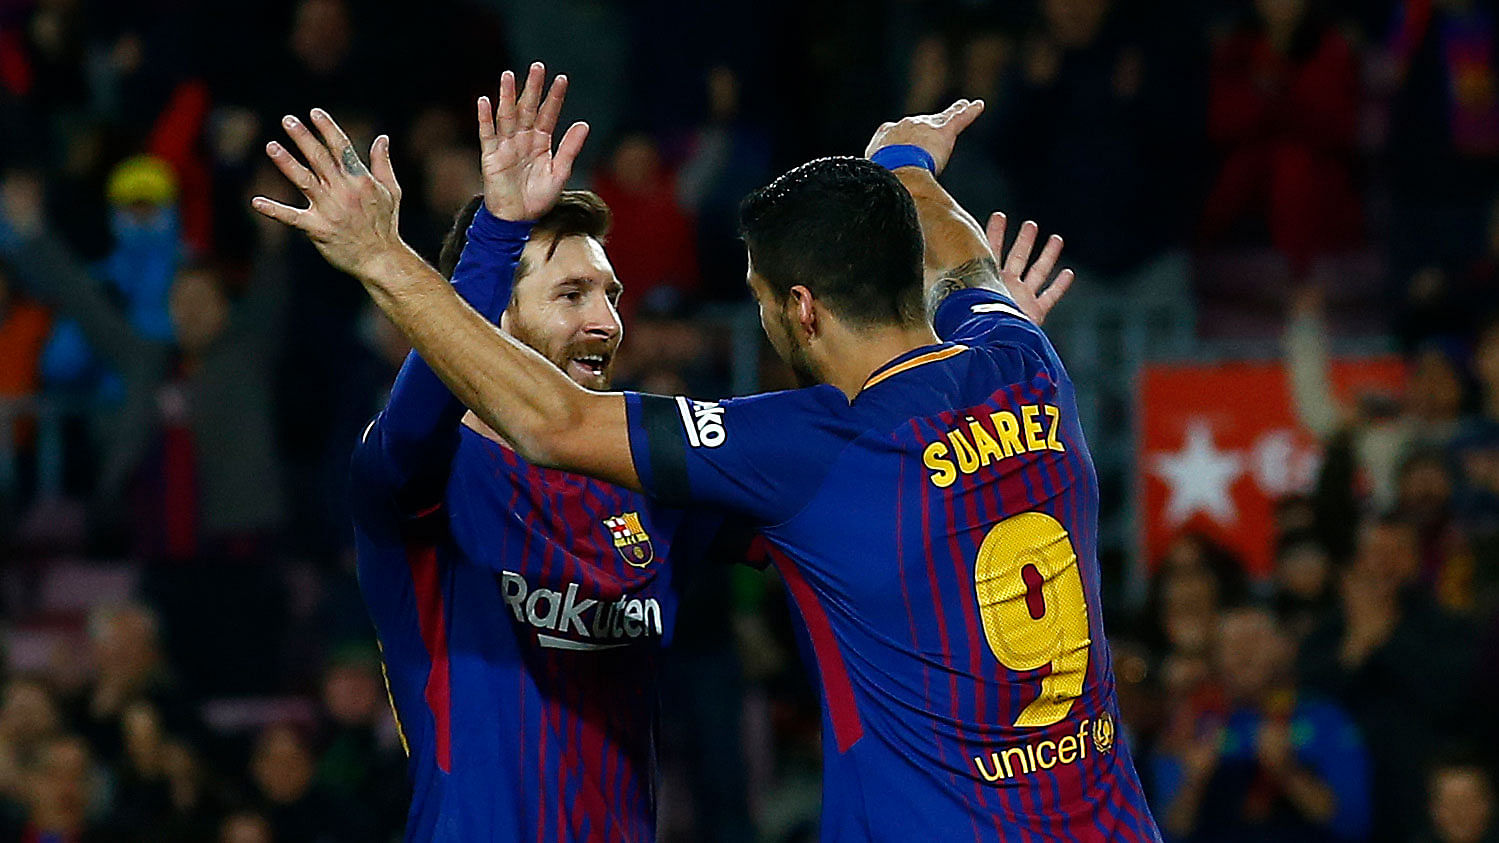 Barcelona’s Luis Suarez, second left, celebrates after scoring with his teammate Lionel Messi during the Spanish La Liga match.